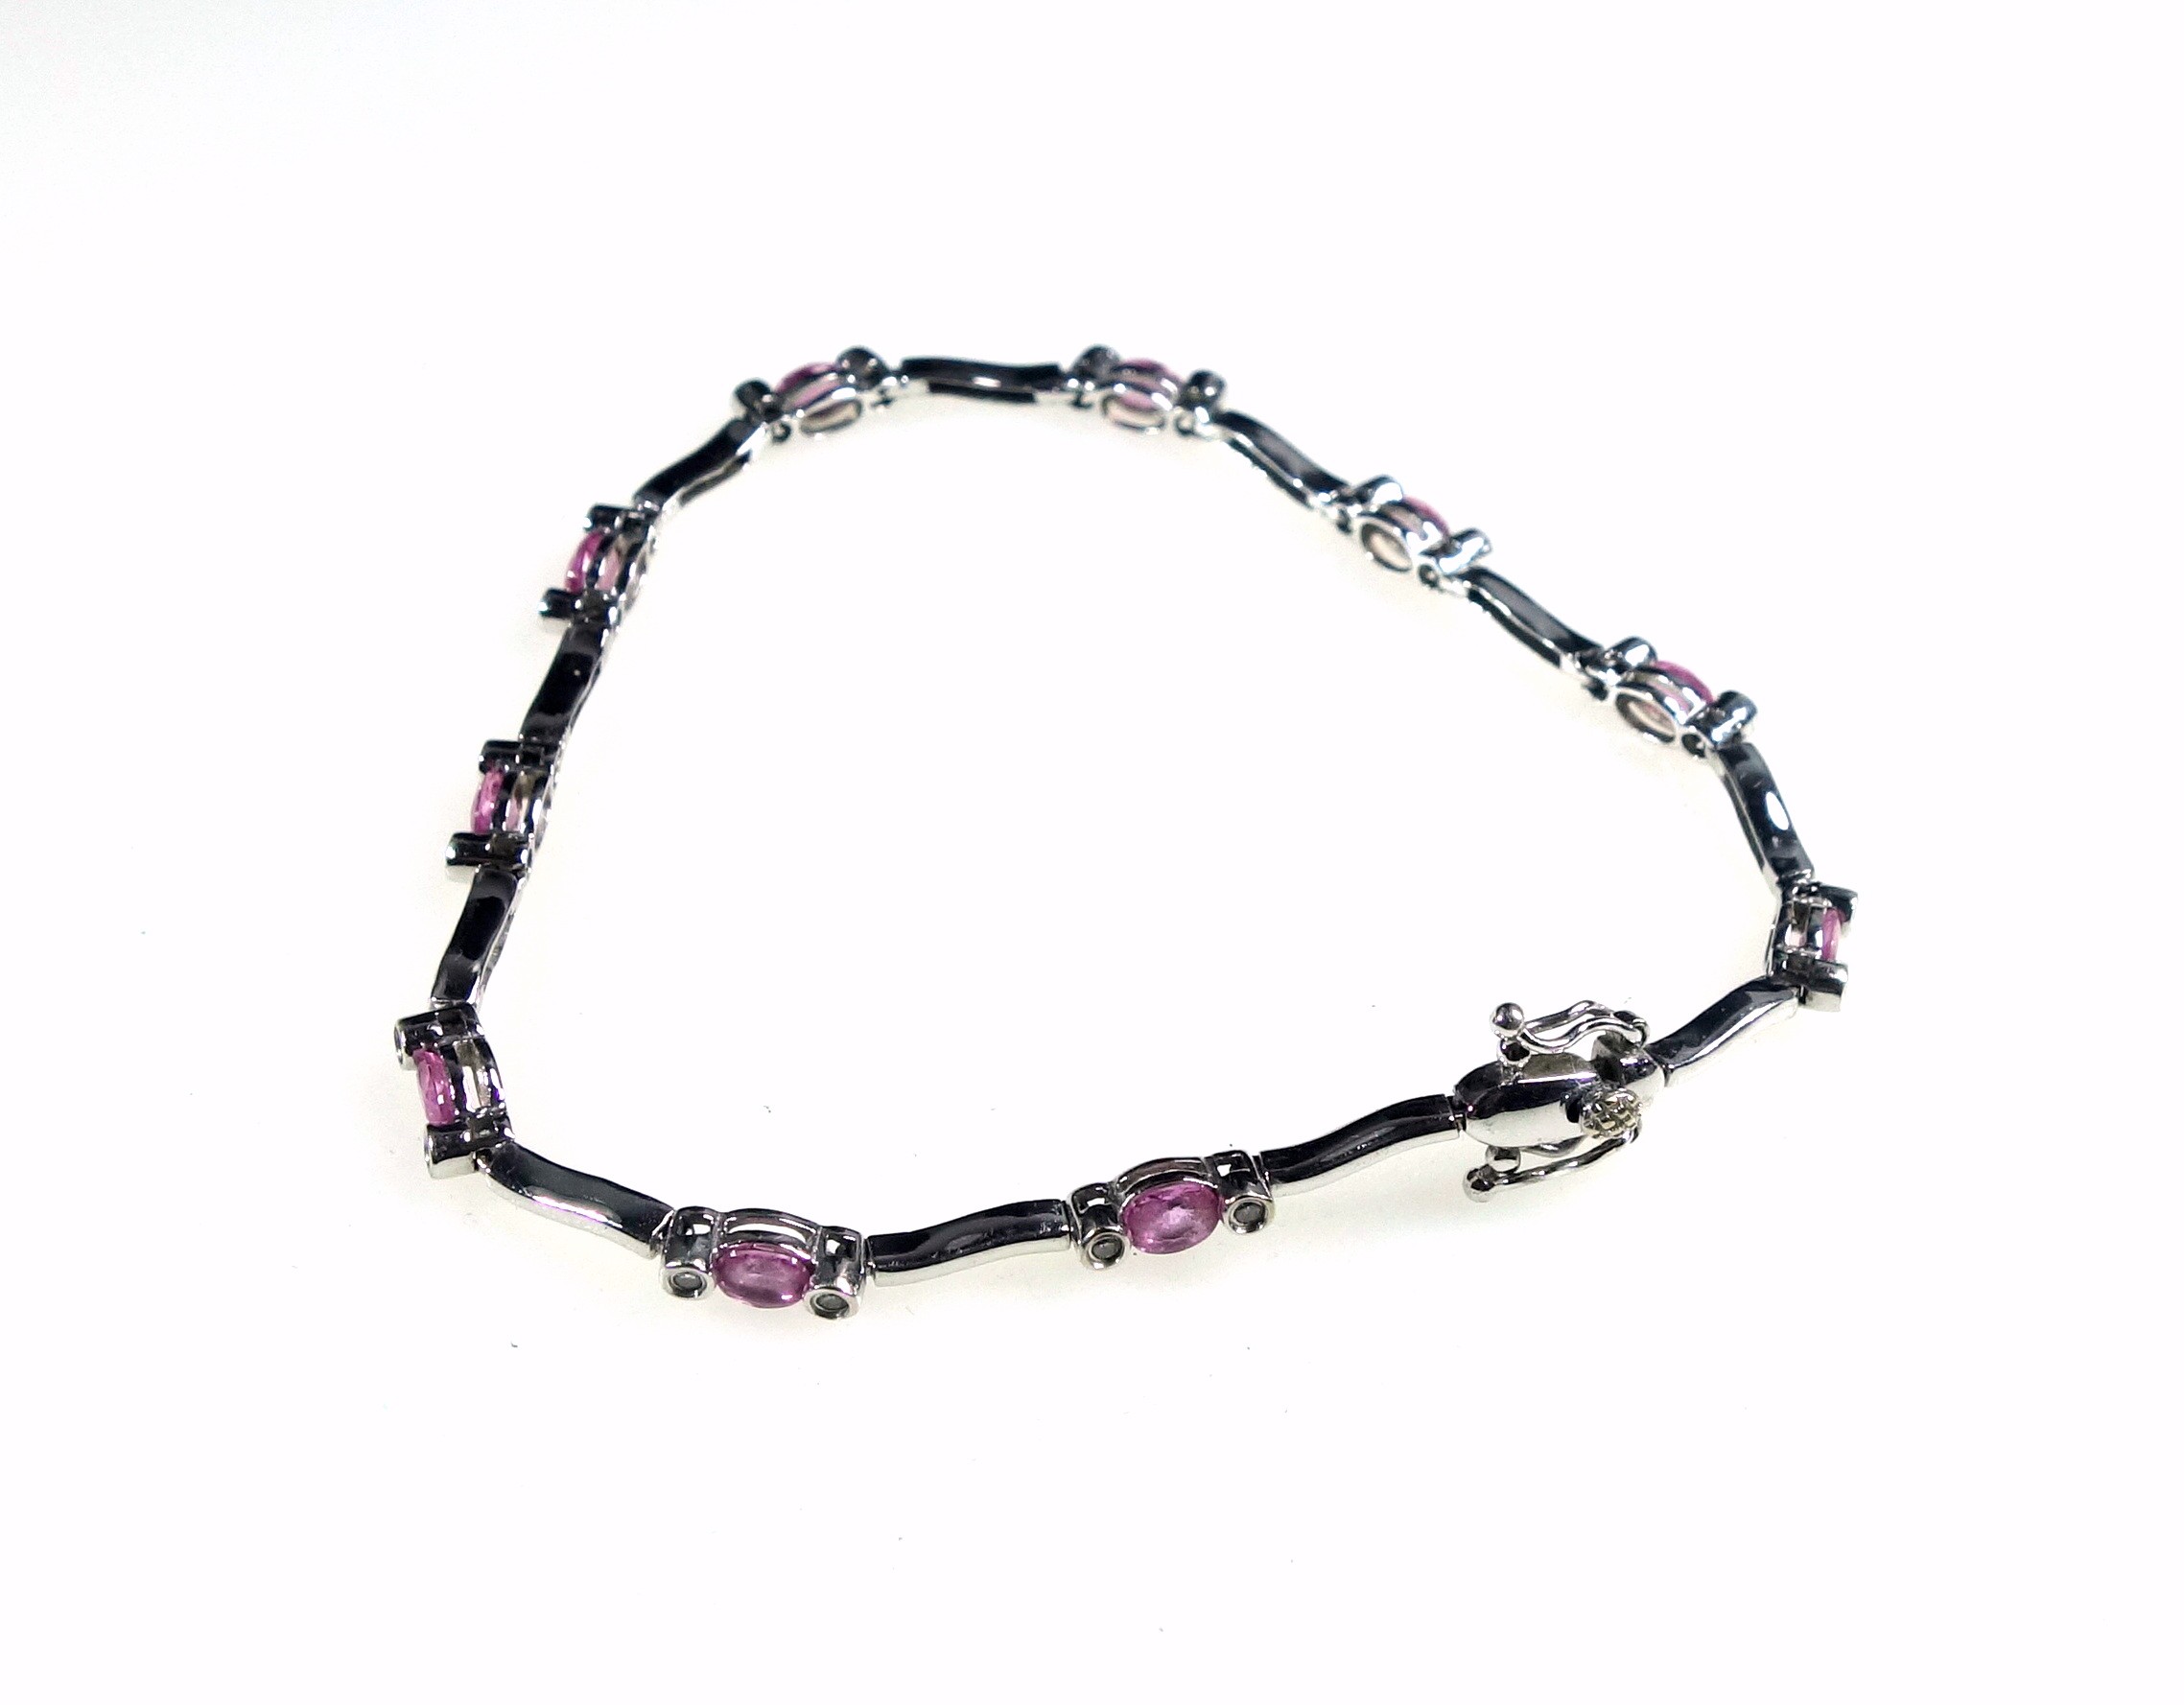 18ct white gold bracelet set with 20 brilliants and pale pink stones, L.18.5cm, gross 7.7grs, cased. - Image 4 of 4